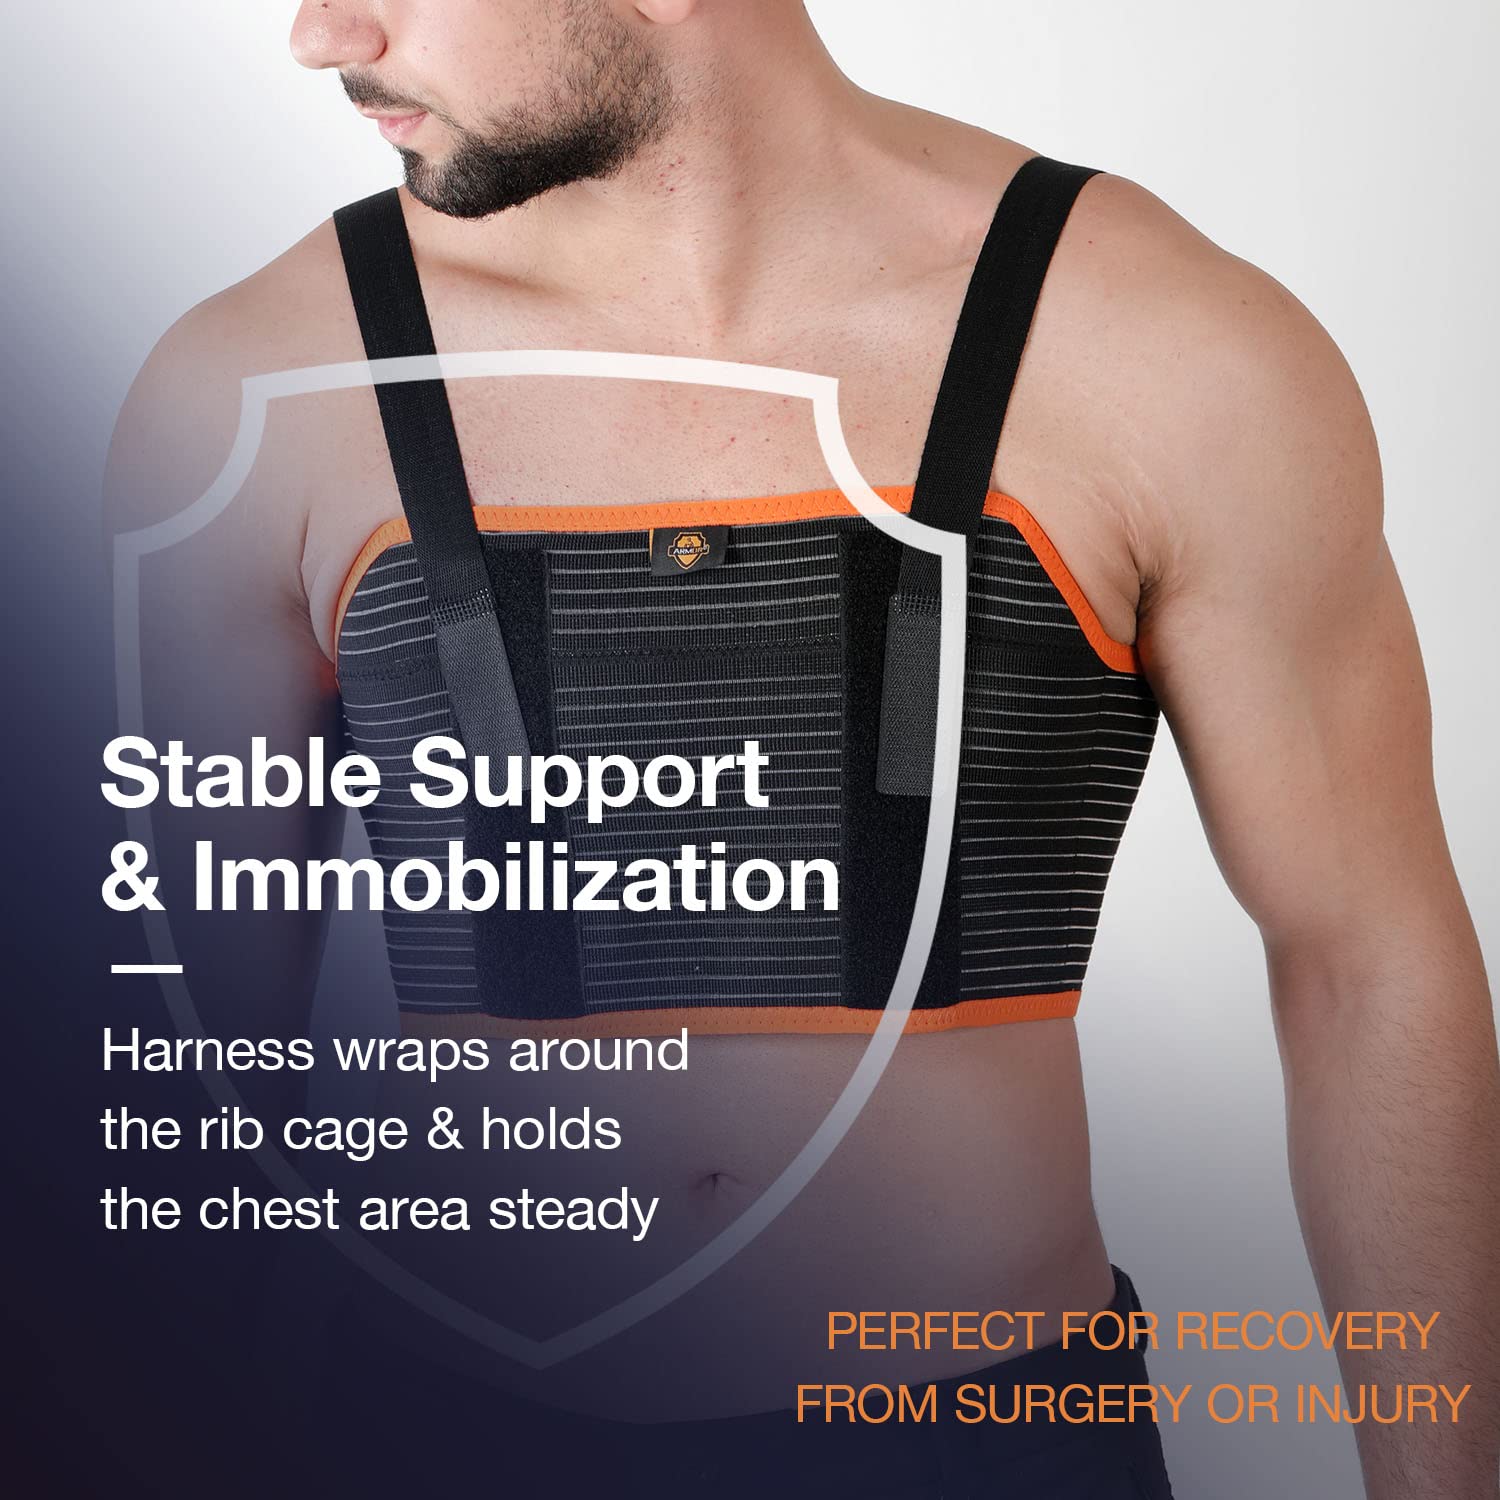 Armor Adult Unisex Chest Support Brace with 2 Metal Inserts to Stabilize the Thorax after Open Heart Surgery, Thoracic Procedure, or Fractures of the Sternum or Rib Cage, Black Color, Size XX-Large, for Men and Women